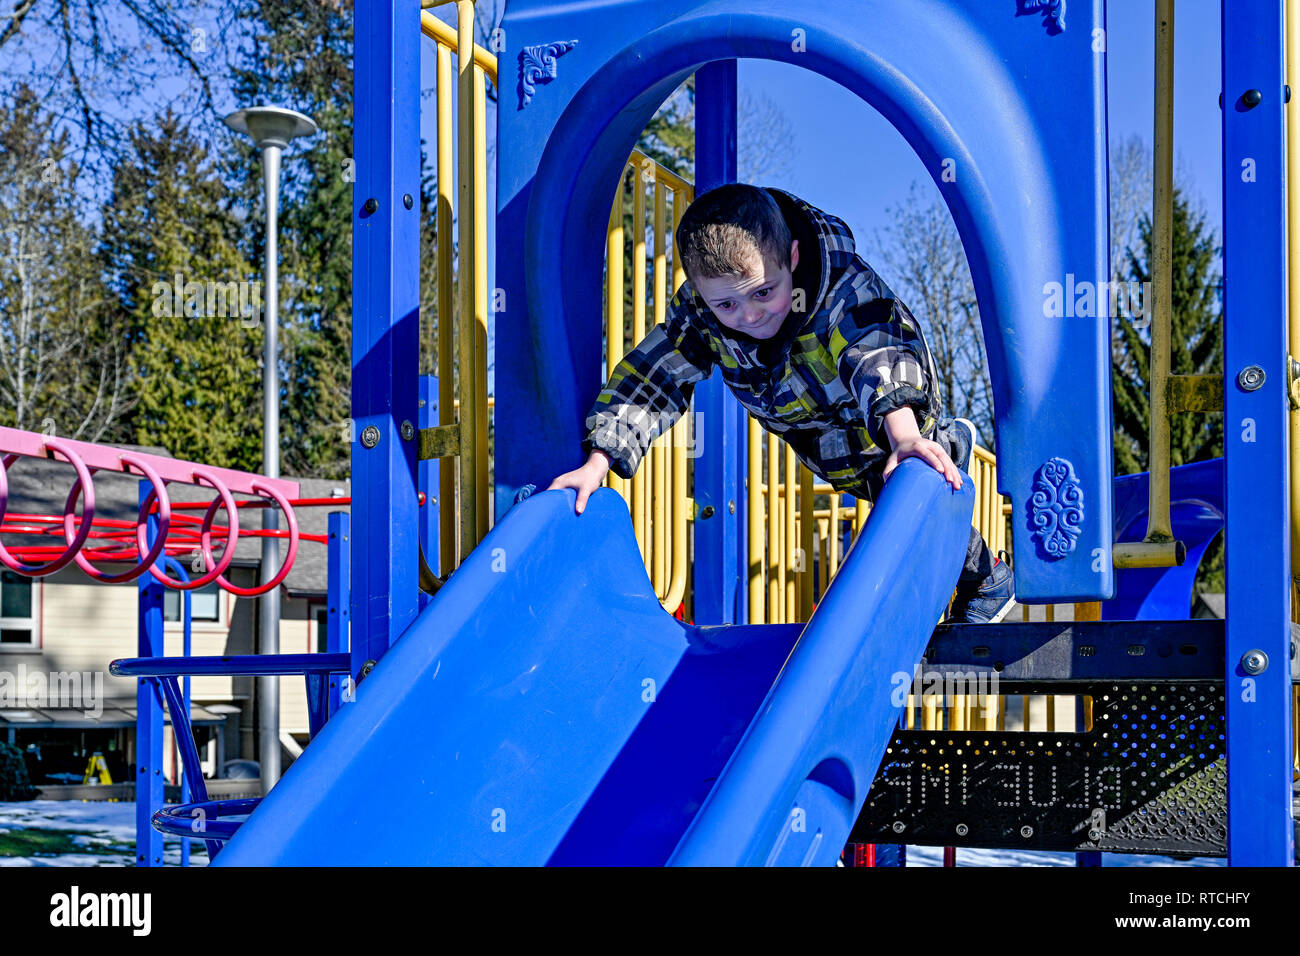 Young boy on playground slide Stock Photo